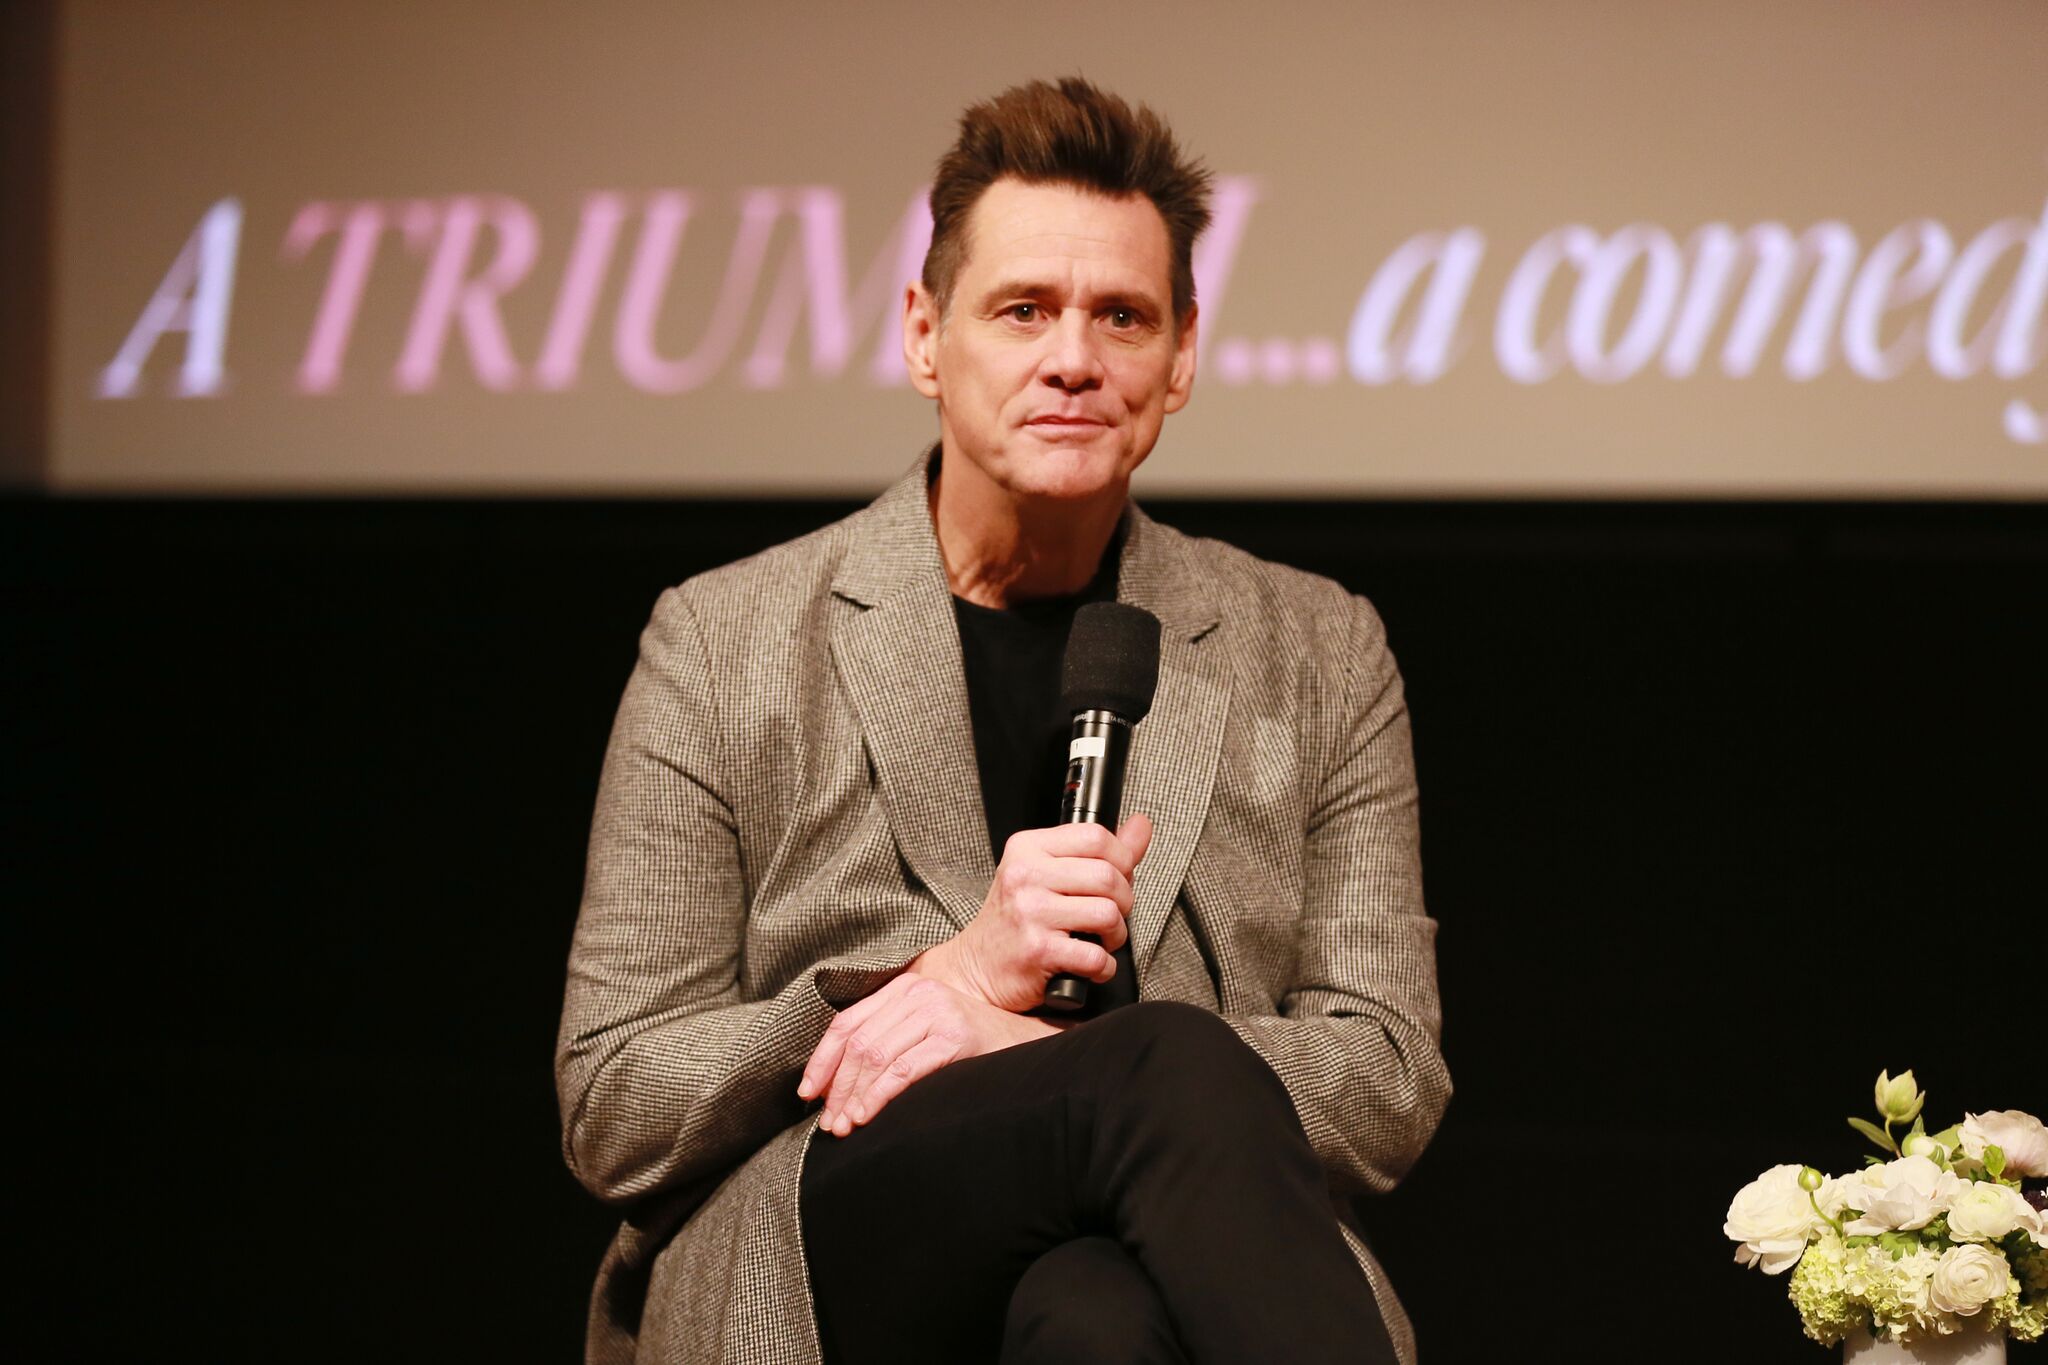 Jim Carrey attends For Your Consideration Screening Of Showtime's "Kidding" at Linwood Dunn Theater | Photo: Getty Images